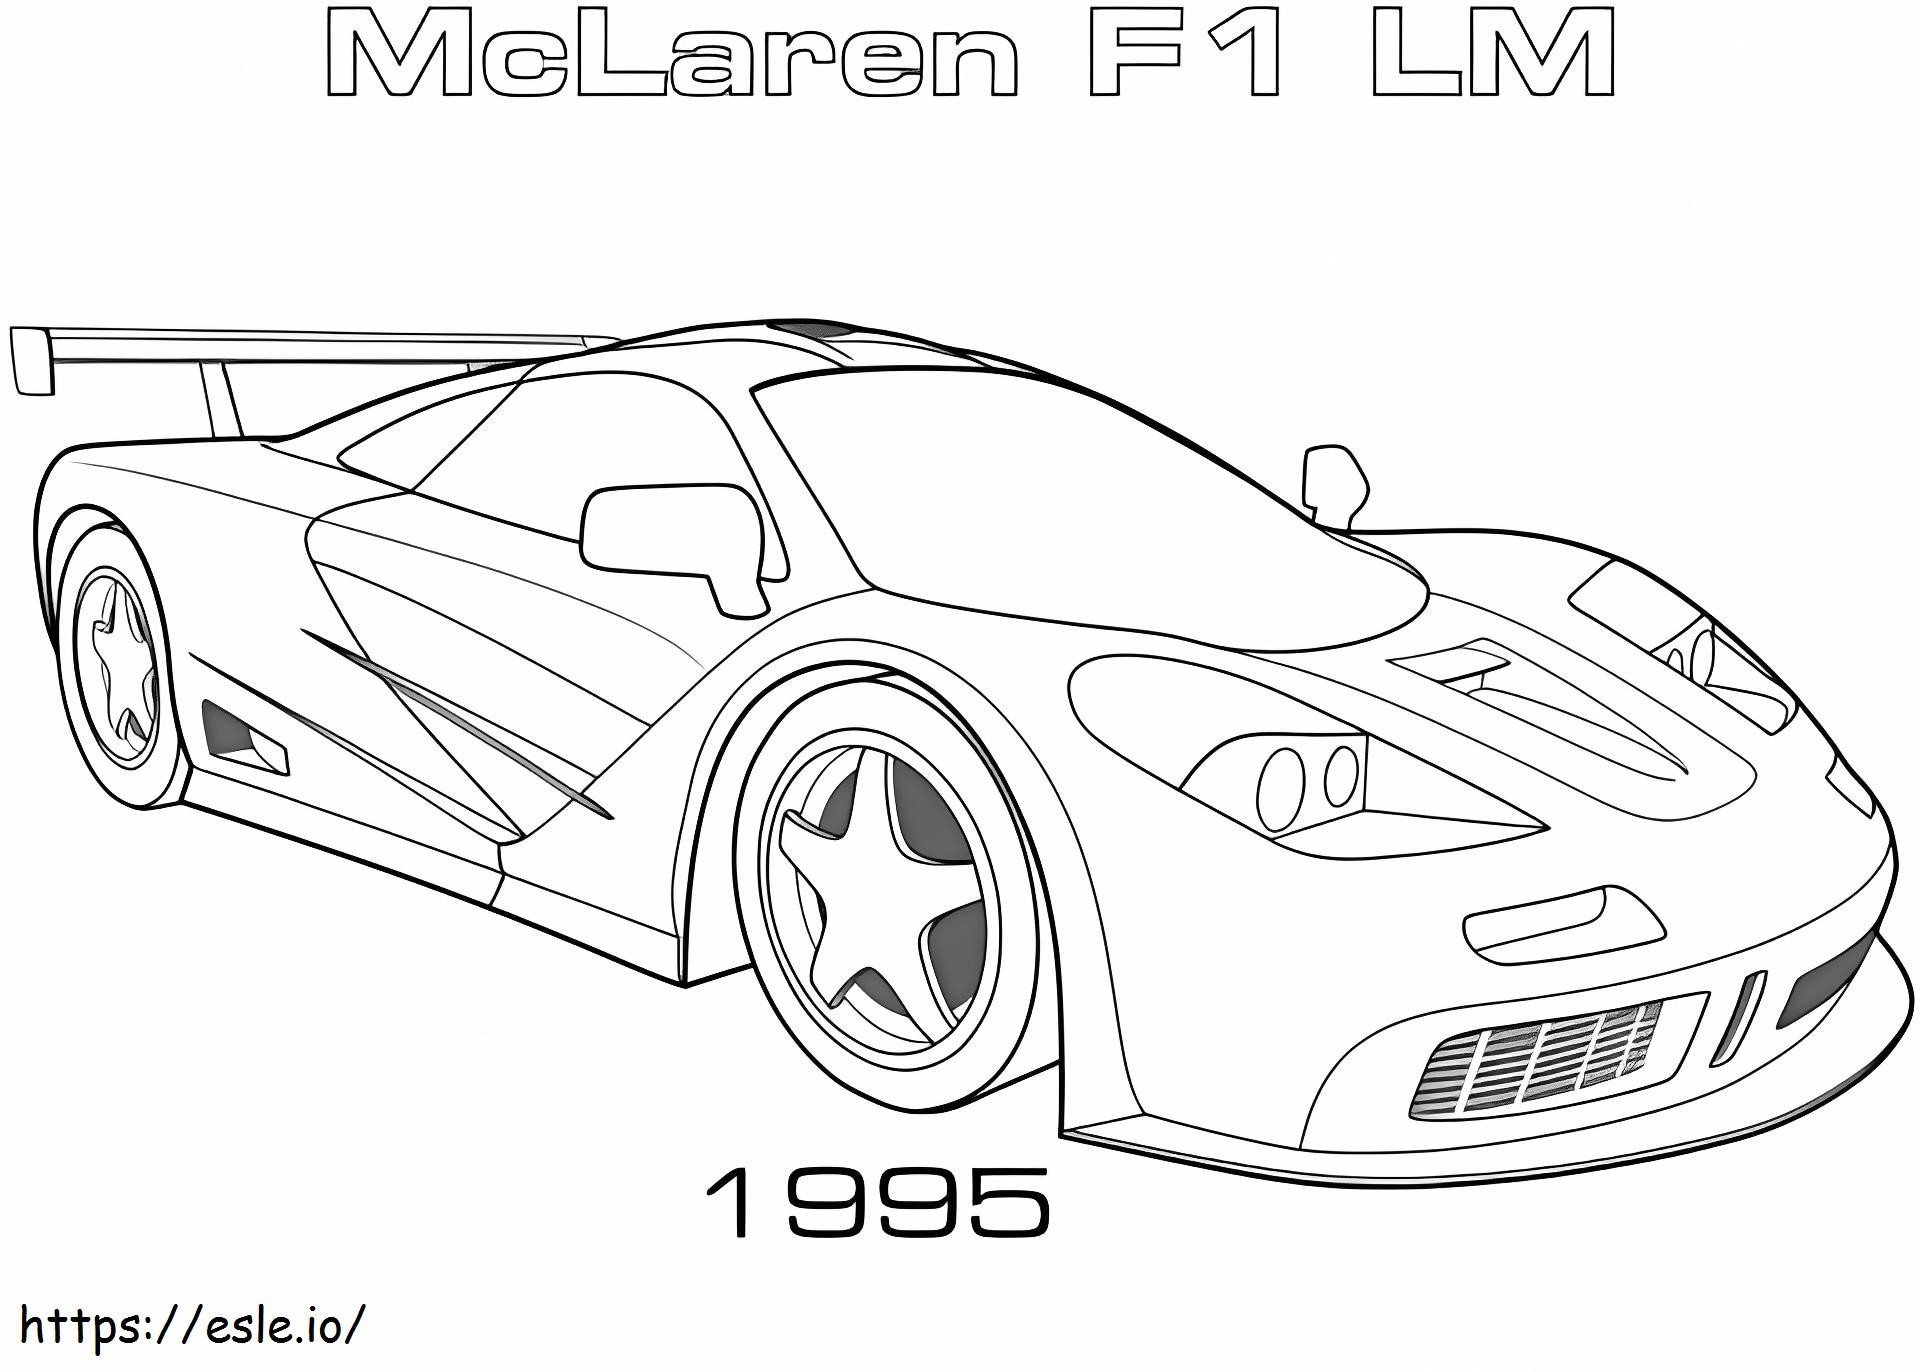 1527154118 1995 Mclaren F1 Lm coloring page